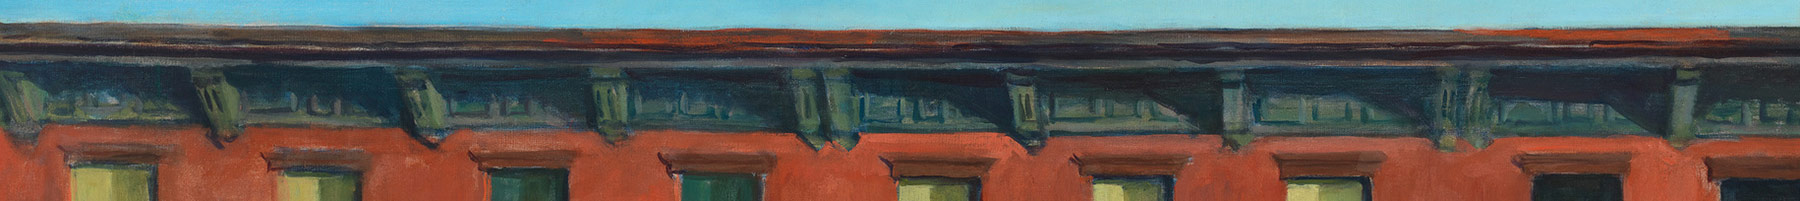 painting of the roof of row houses